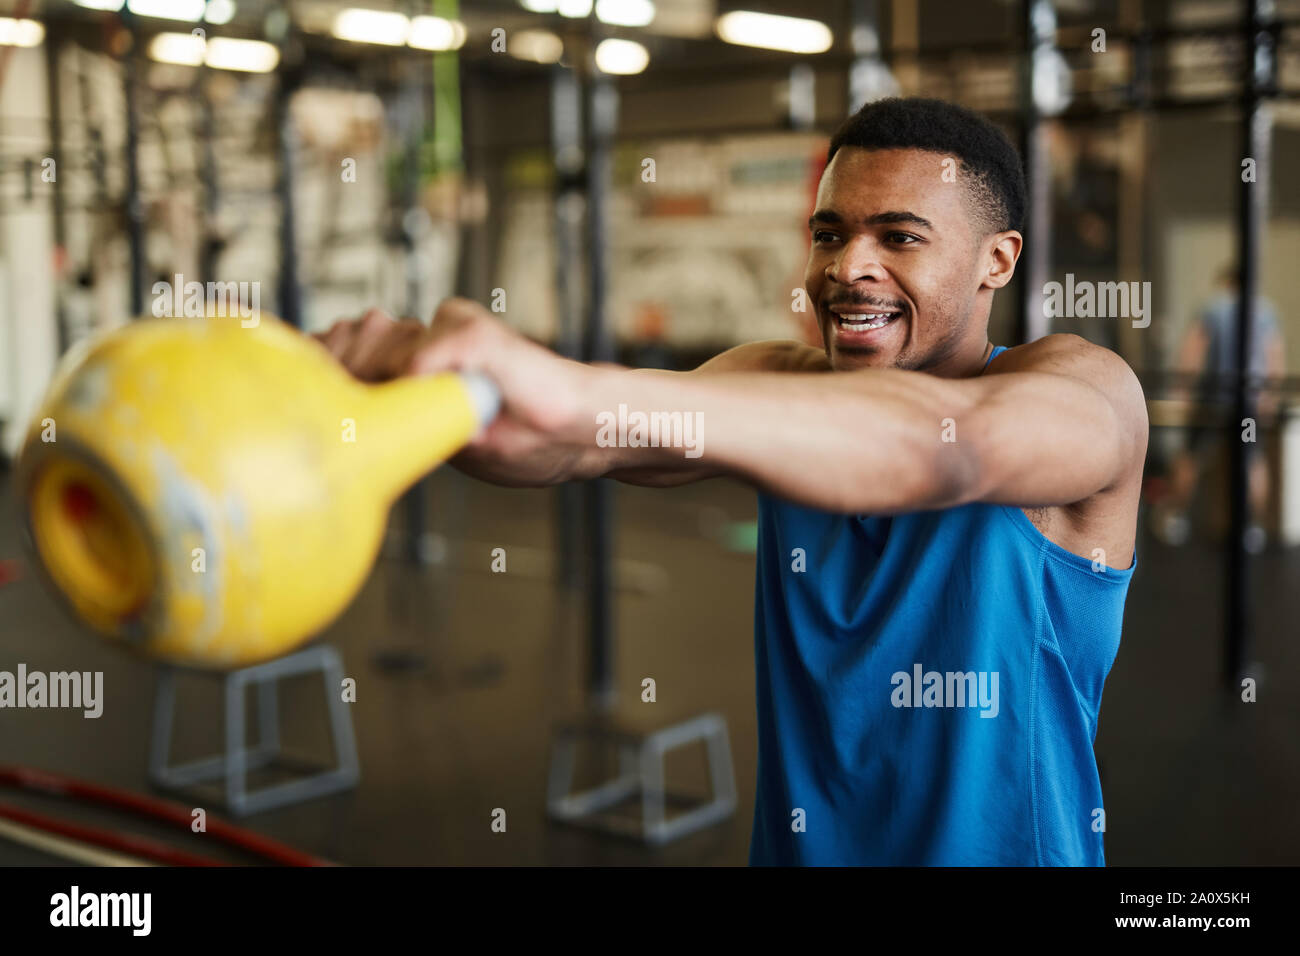 Waist up portrait of strong African-American man swinging kettlebell during cross workout in modern gym, copy space Stock Photo